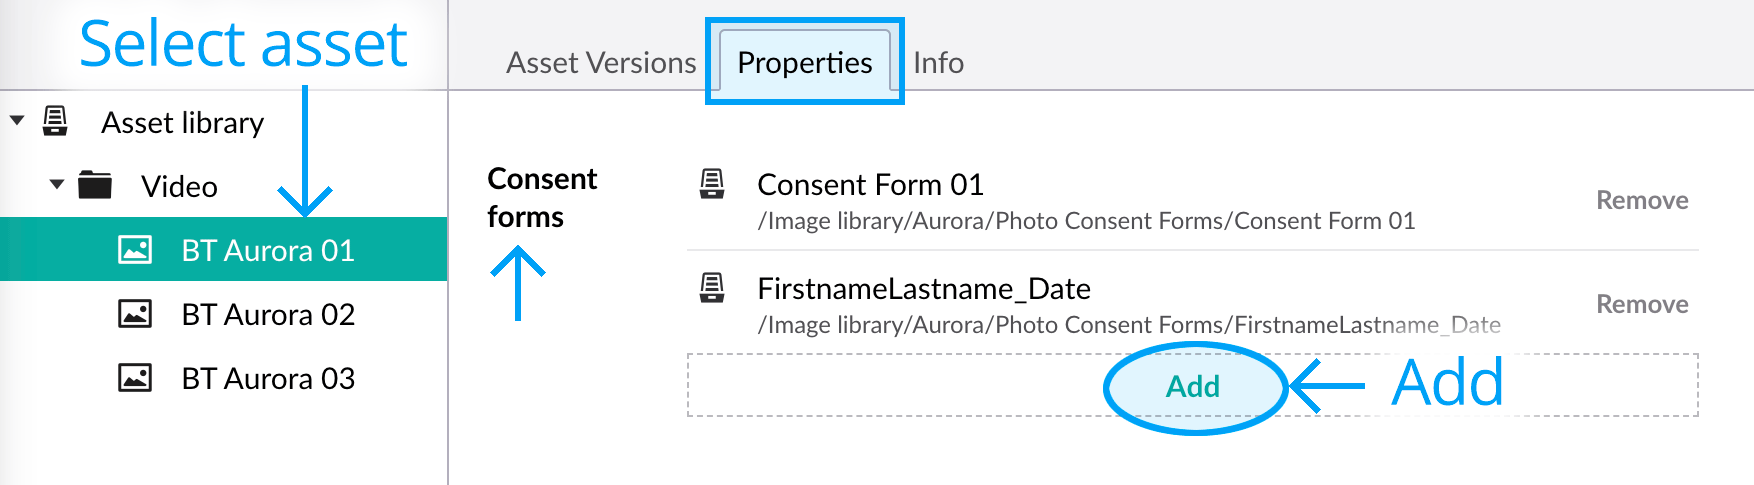 Assign consent forms to assets - Add forms